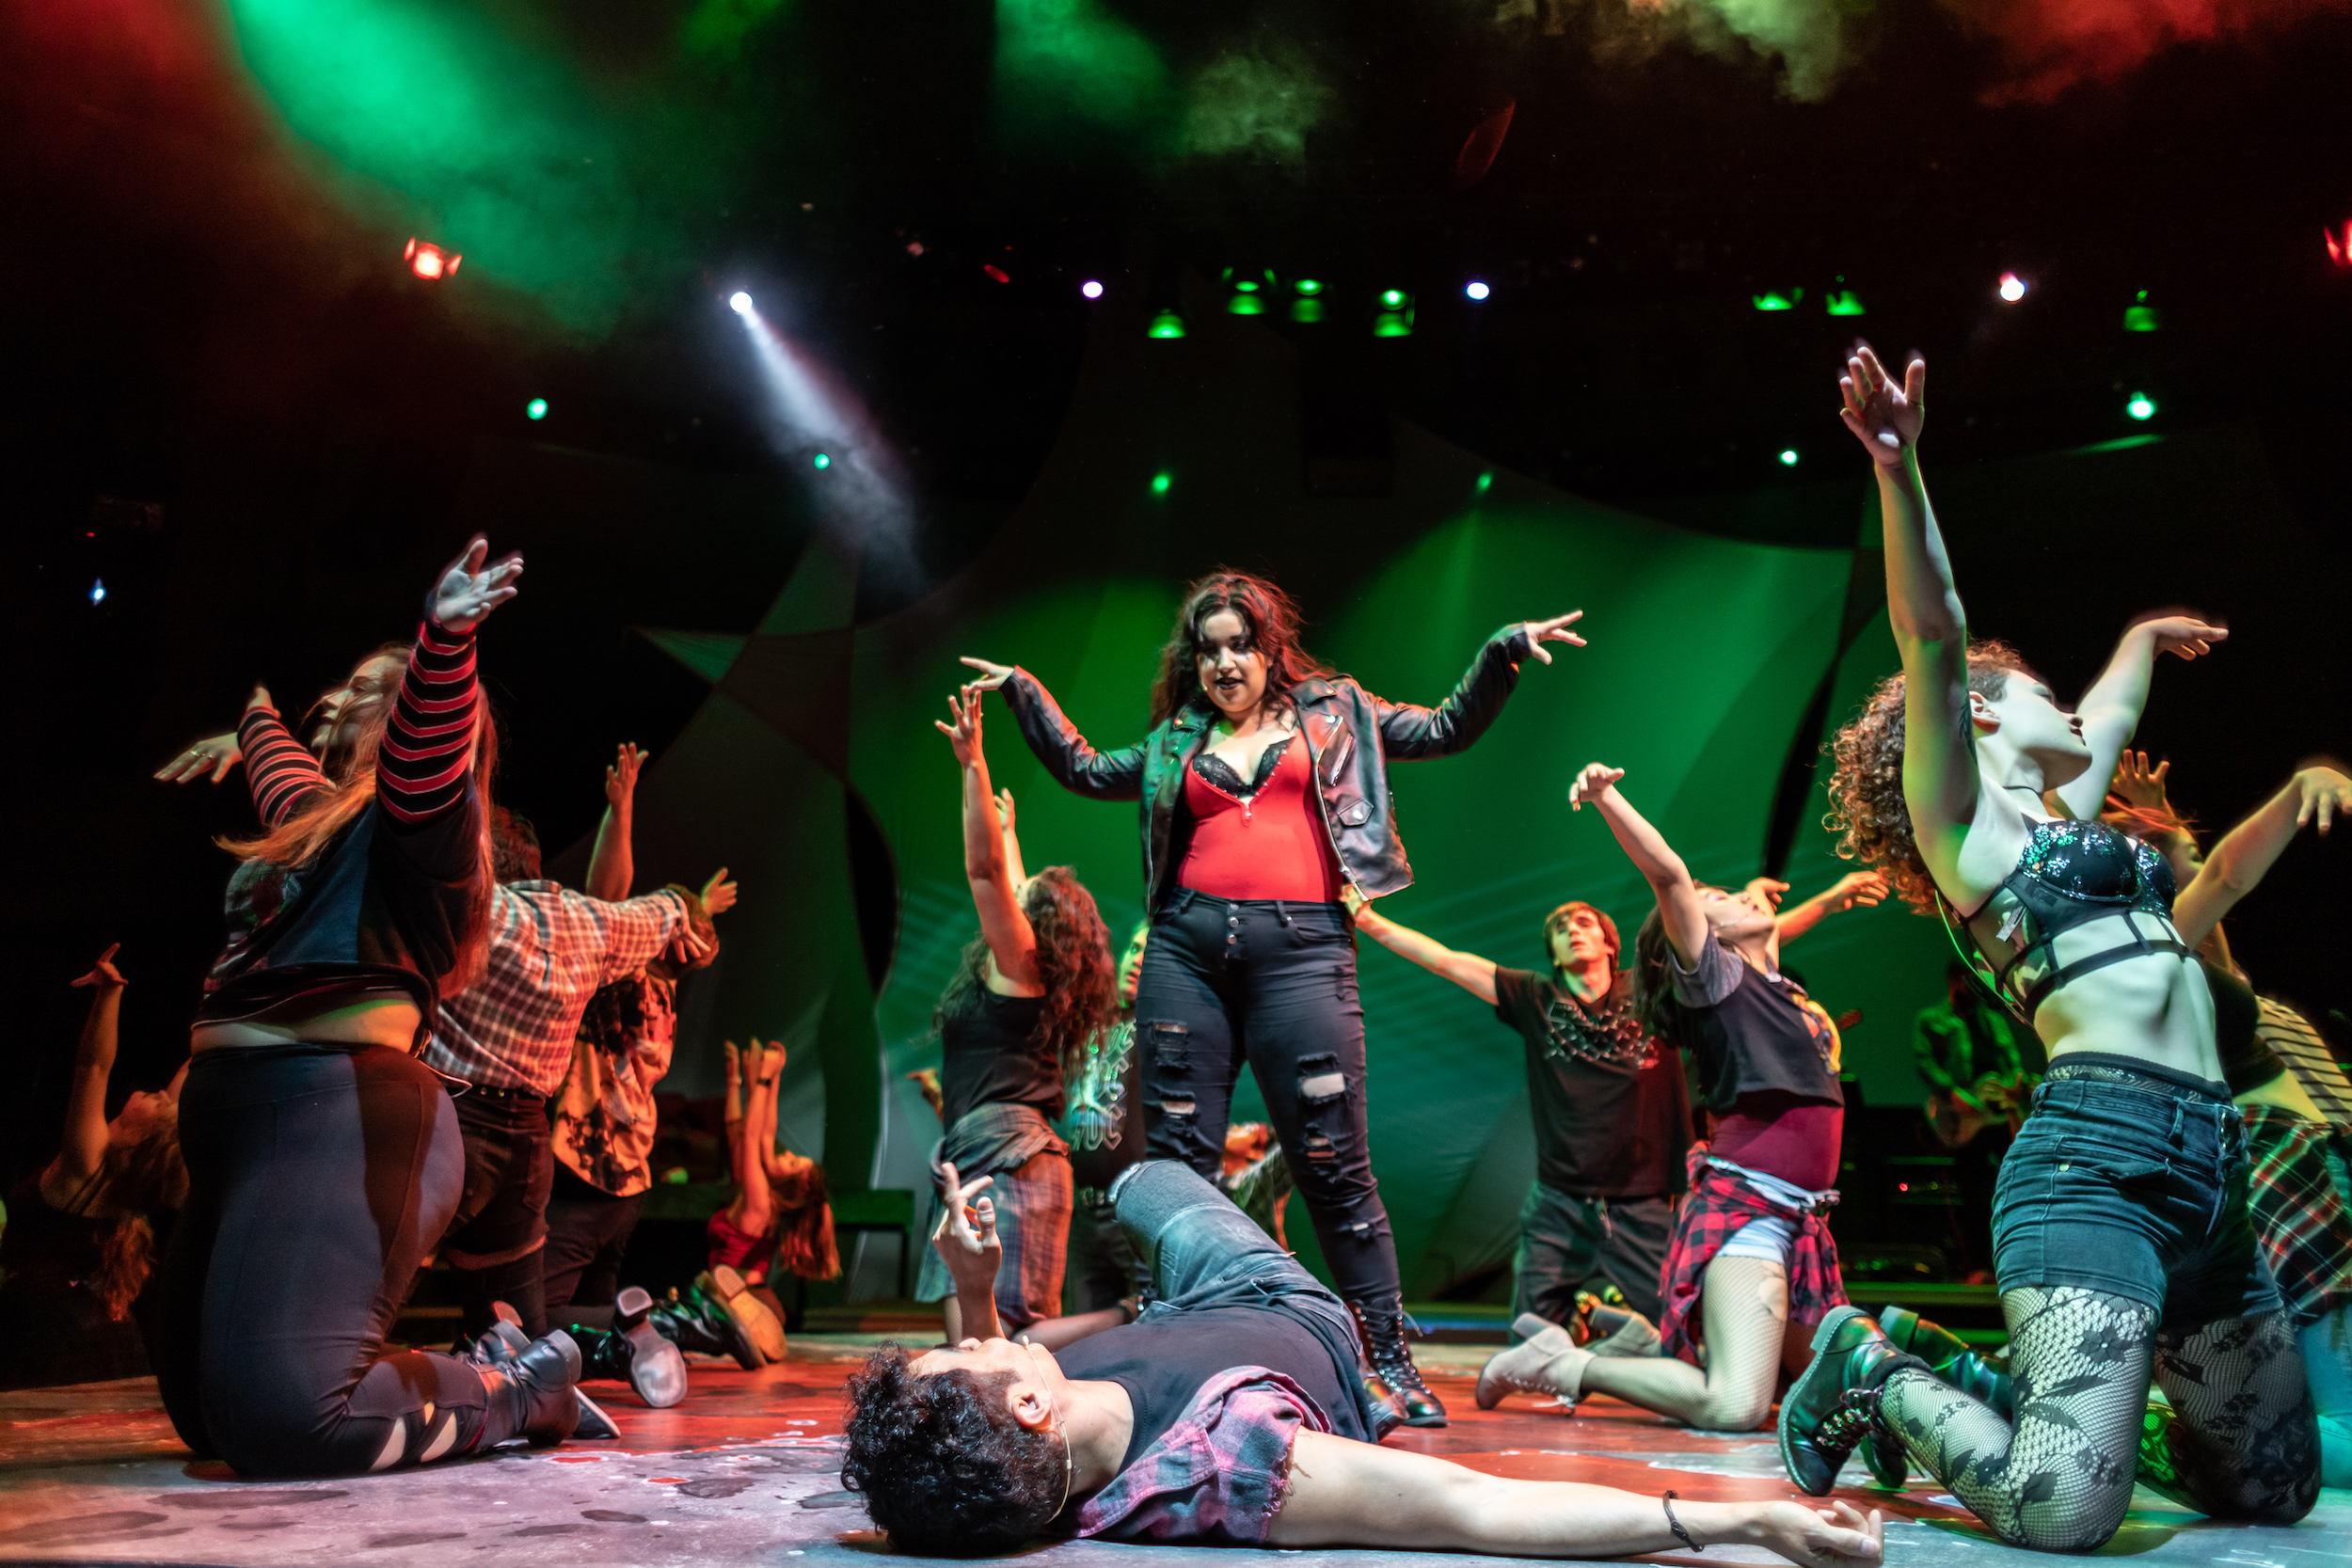 “American Idiot” finds success in daring choice